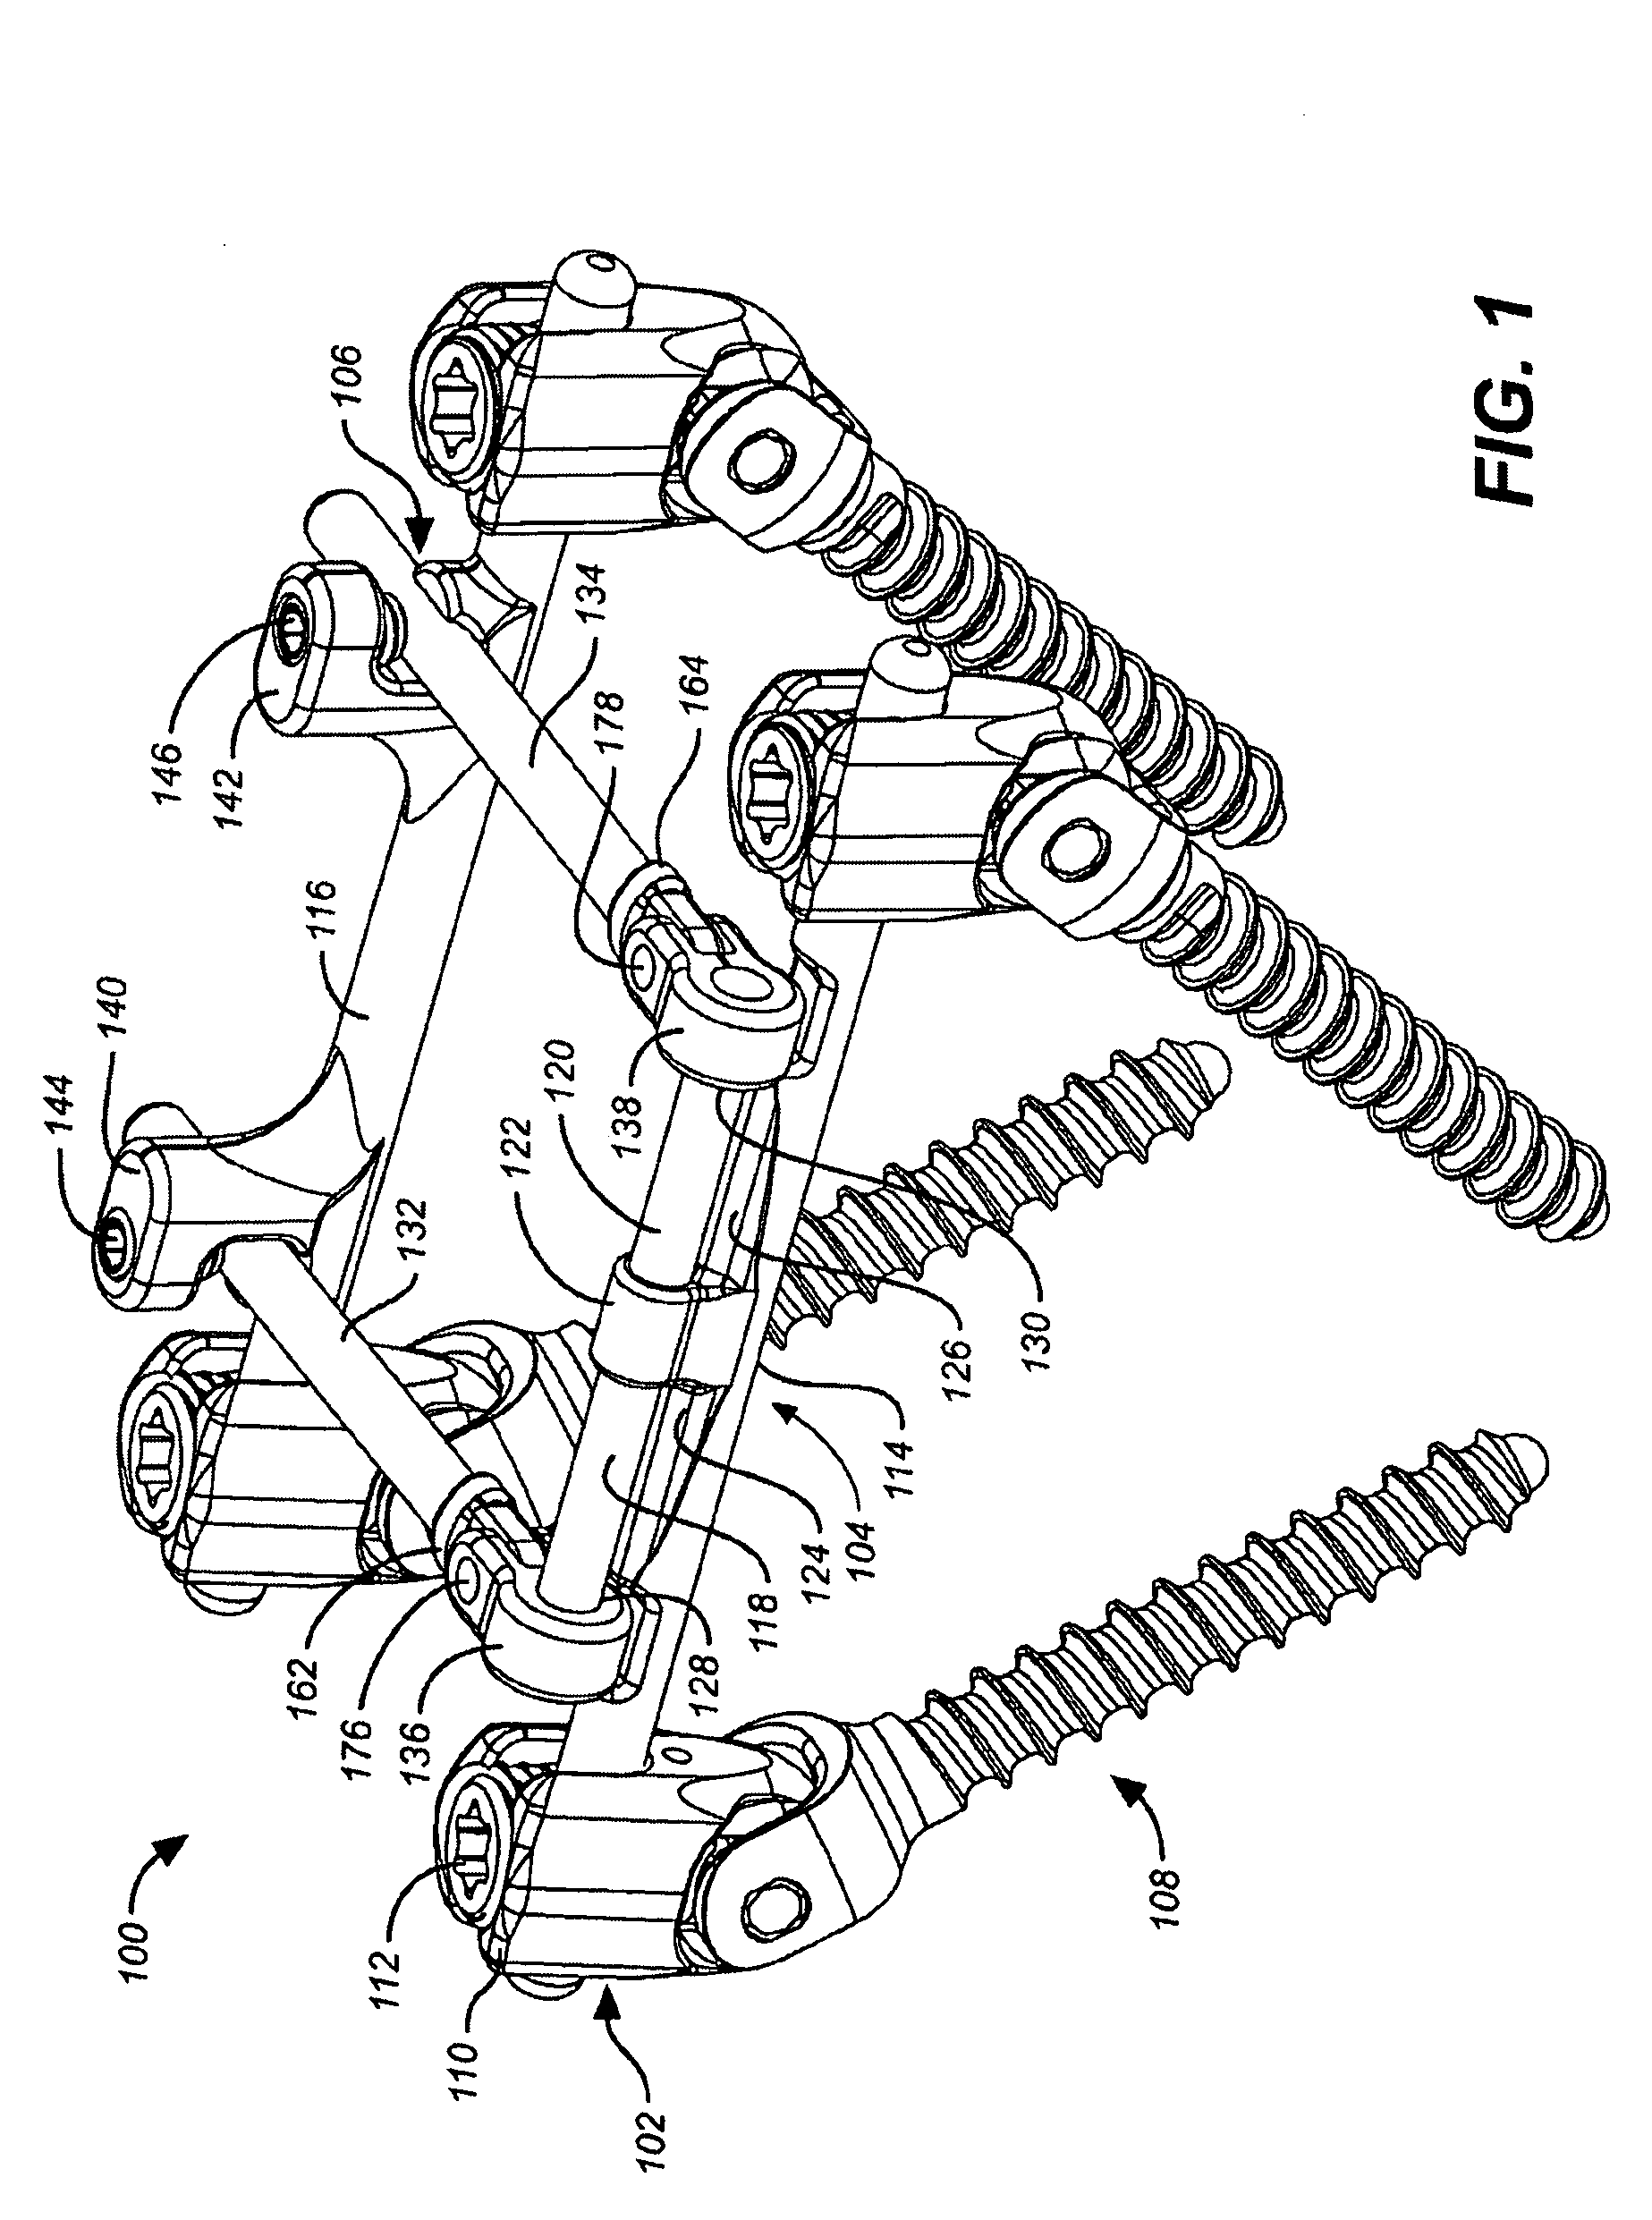 Method for implanting a deflection rod system and customizing the deflection rod system for a particular patient need for dynamic stabilization and motion preservation spinal implantation system